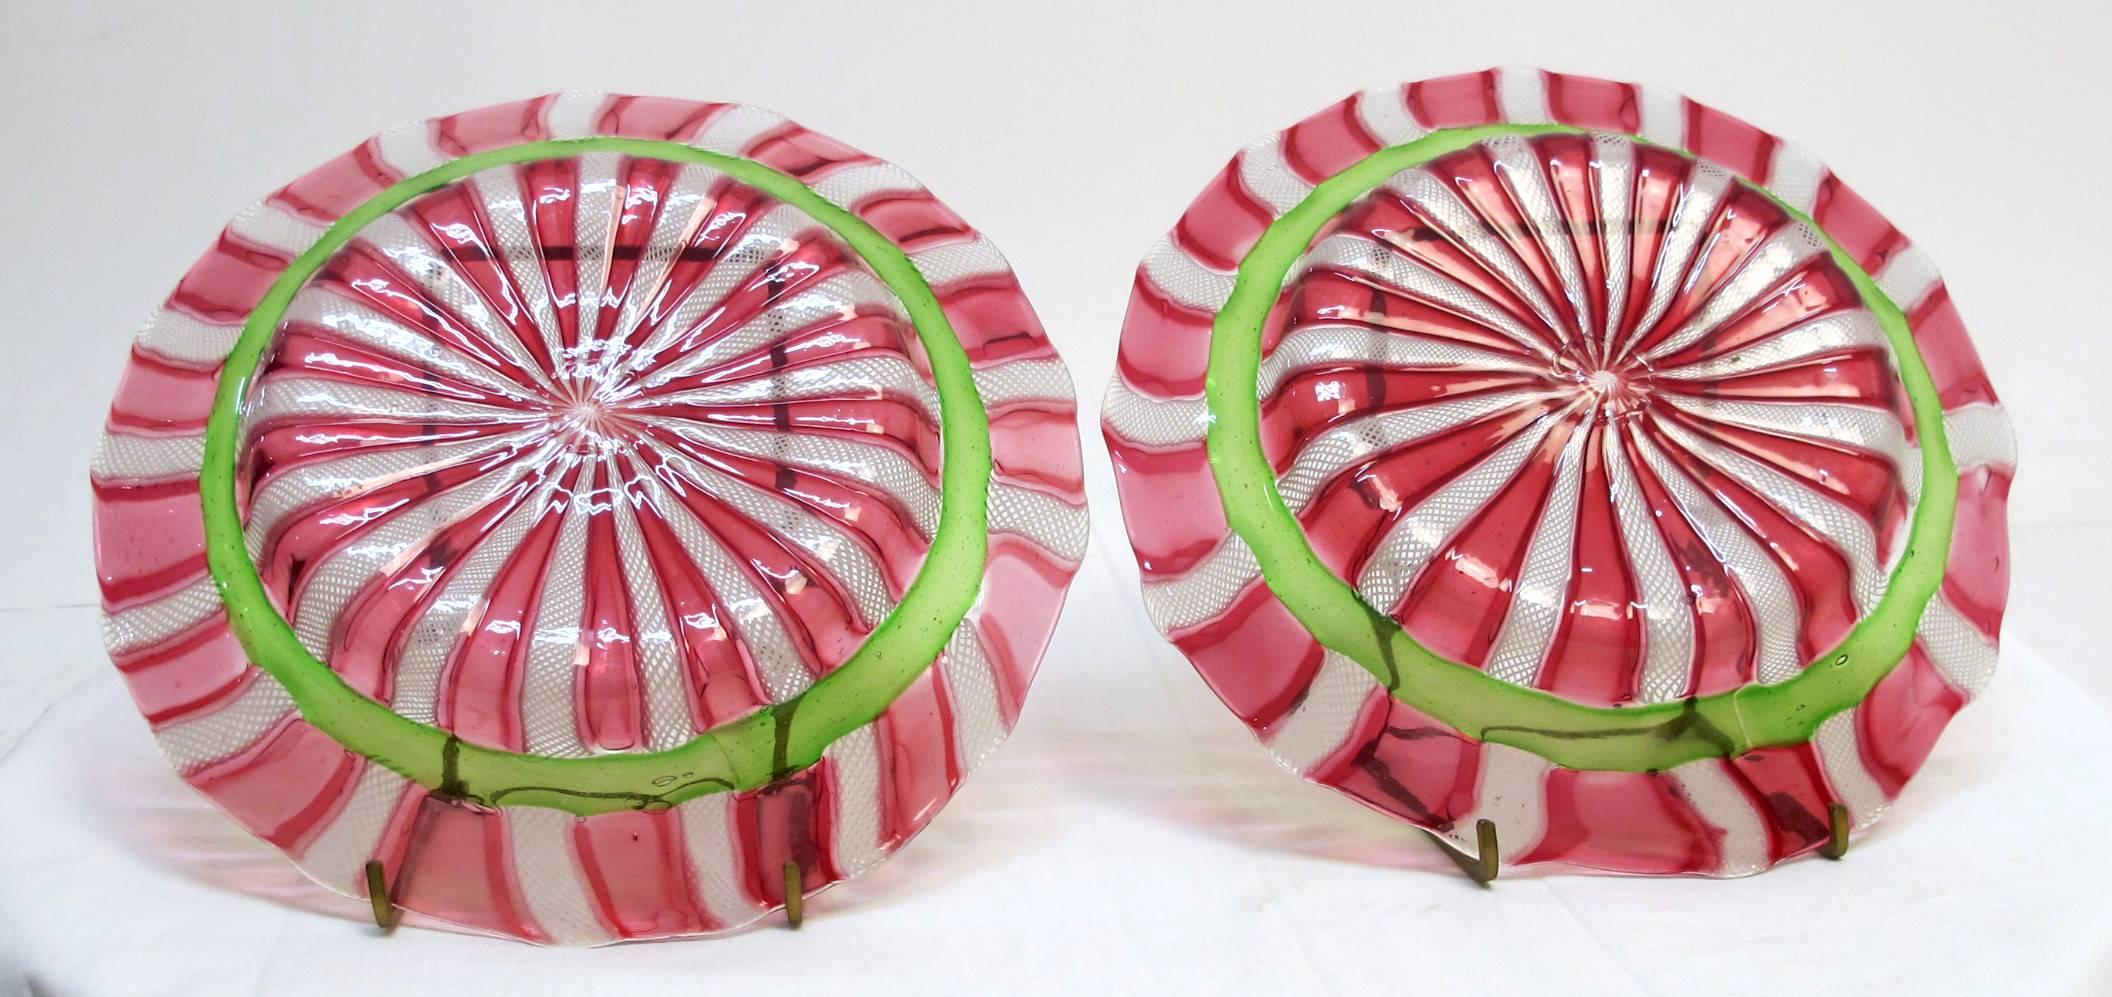 A beautiful rare pair of vintage Venetian glass luncheon or display plates (possibly Salviati), Italy, mid-20th century.